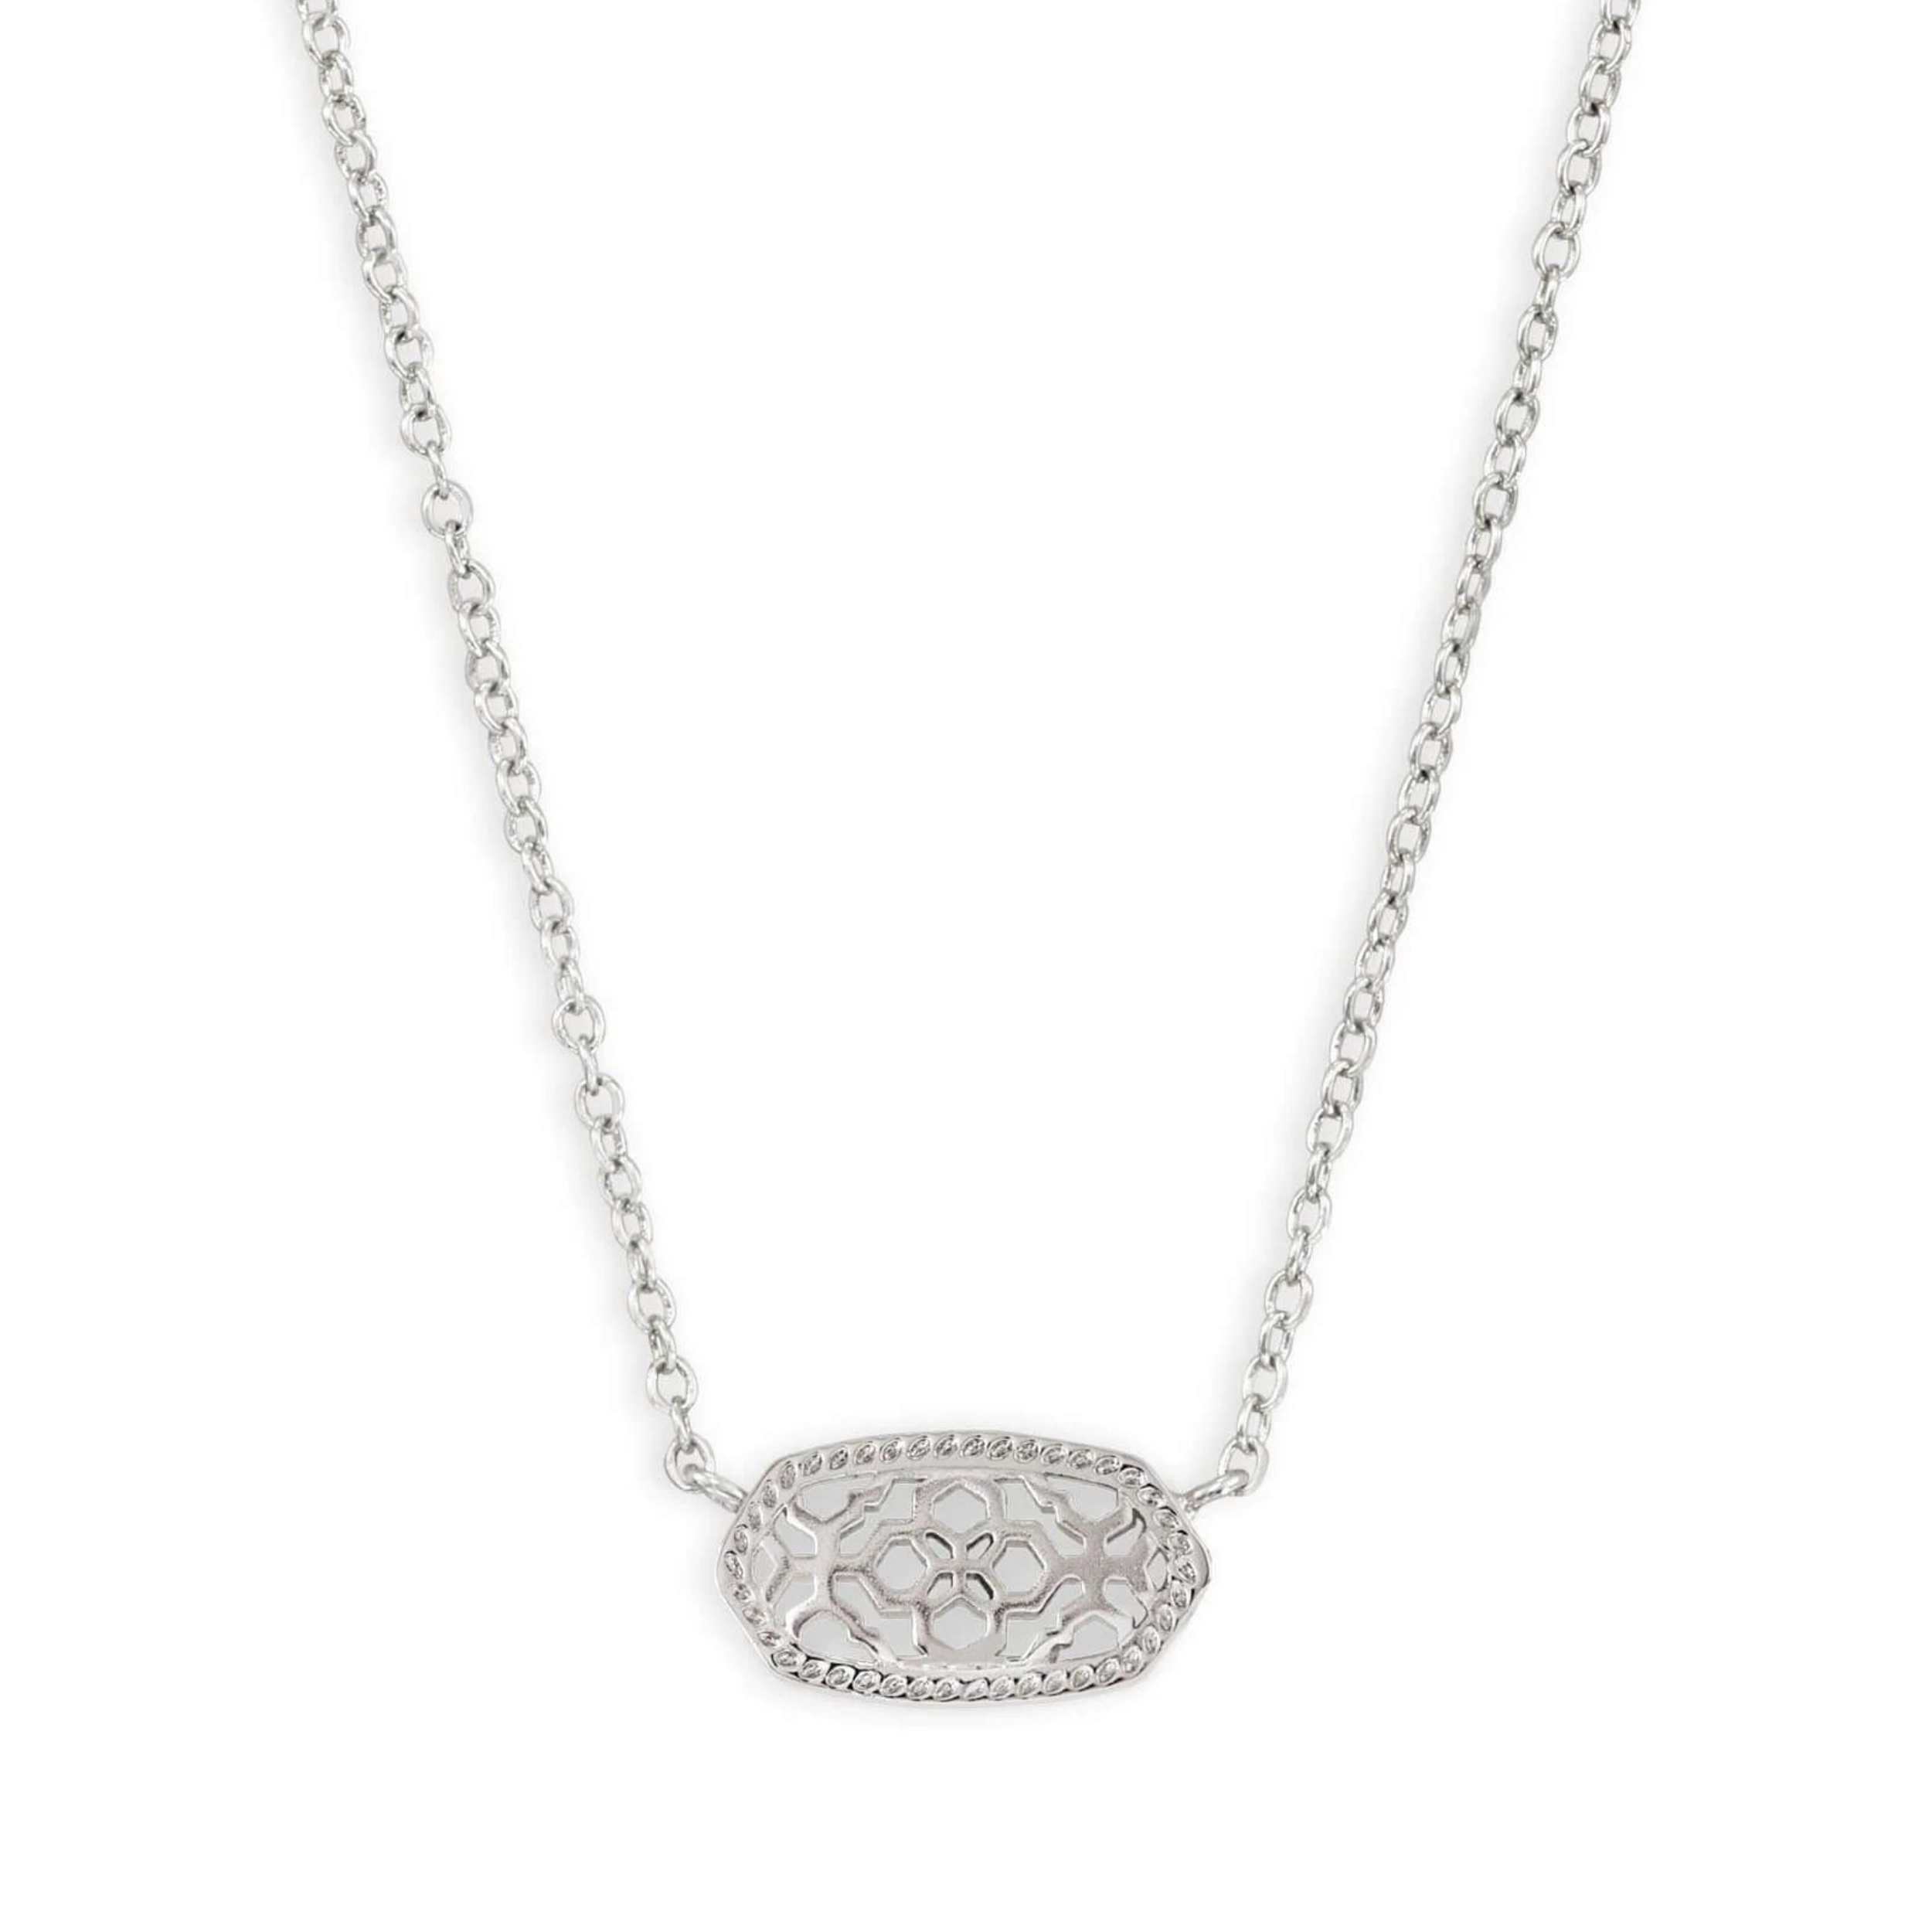 Silver necklace with filigree metal pendant, pictured on a white background.